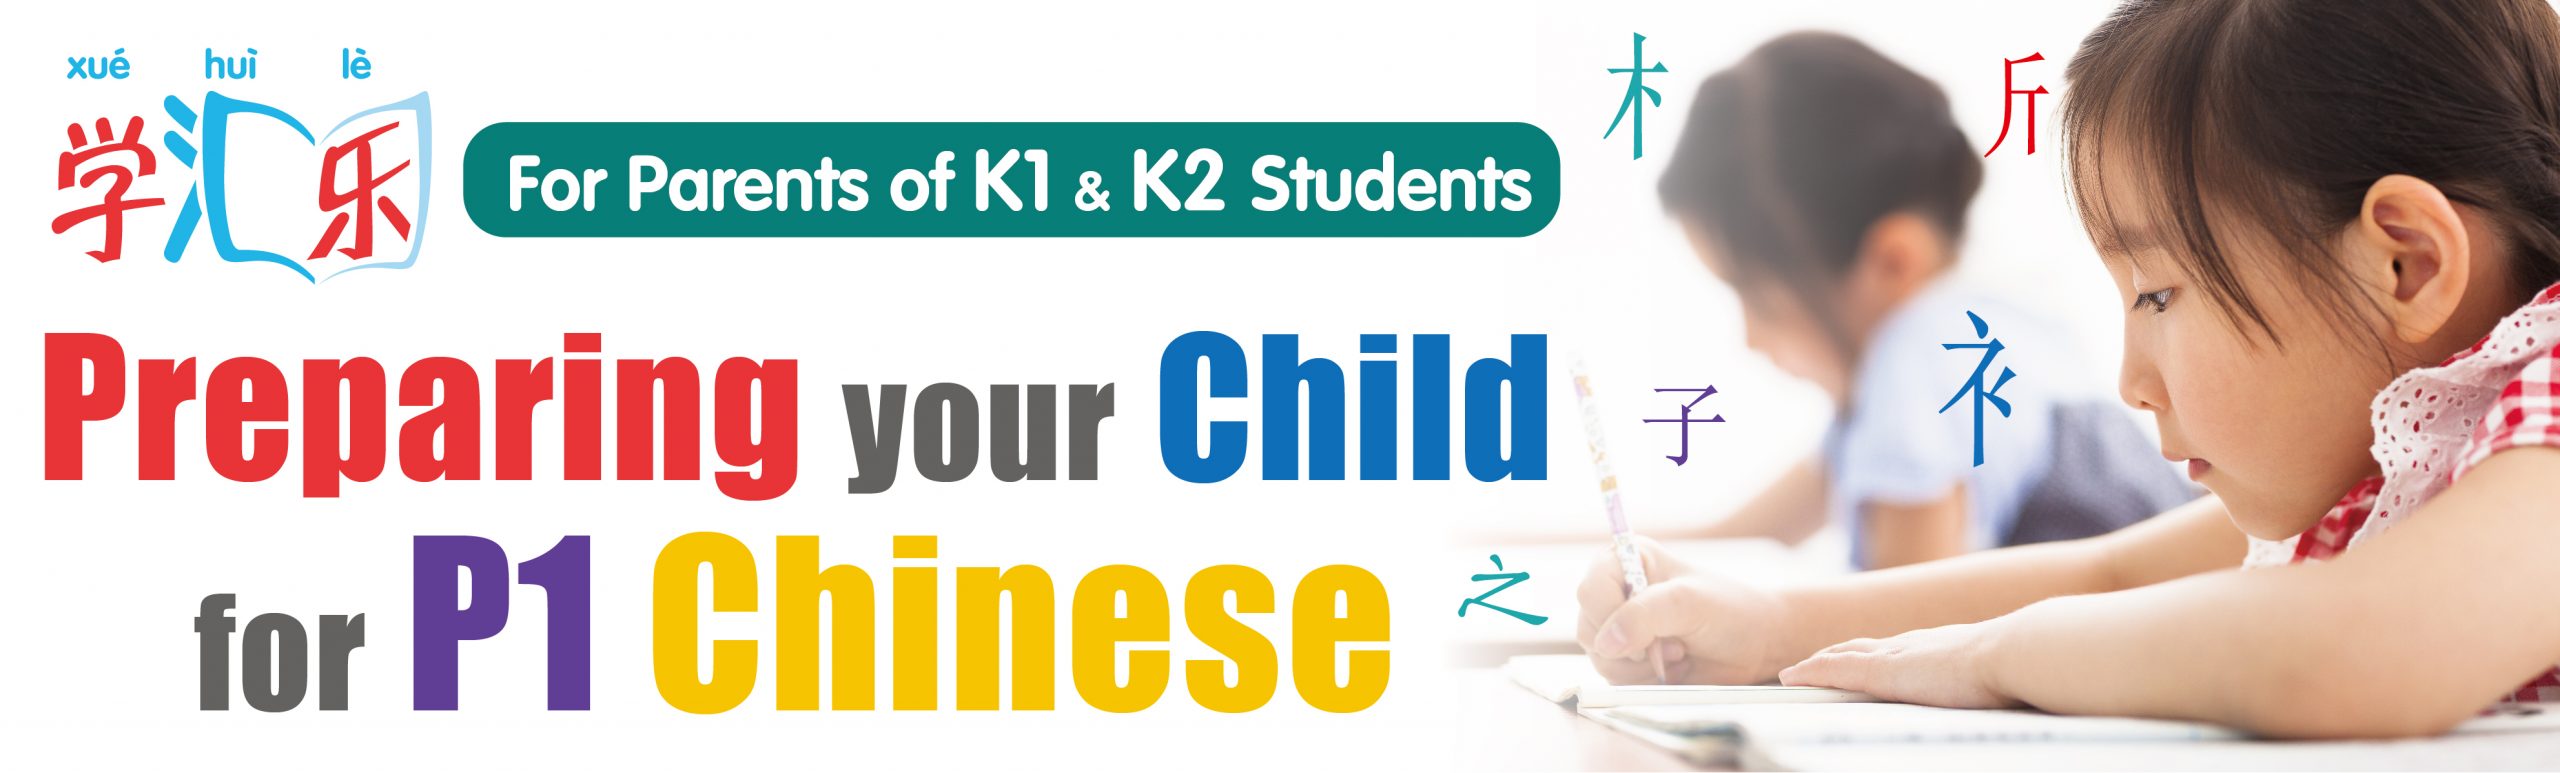 Preparing your Child for P1 Chinese AY2023 by Mind Stretcher, Xue Hui Le